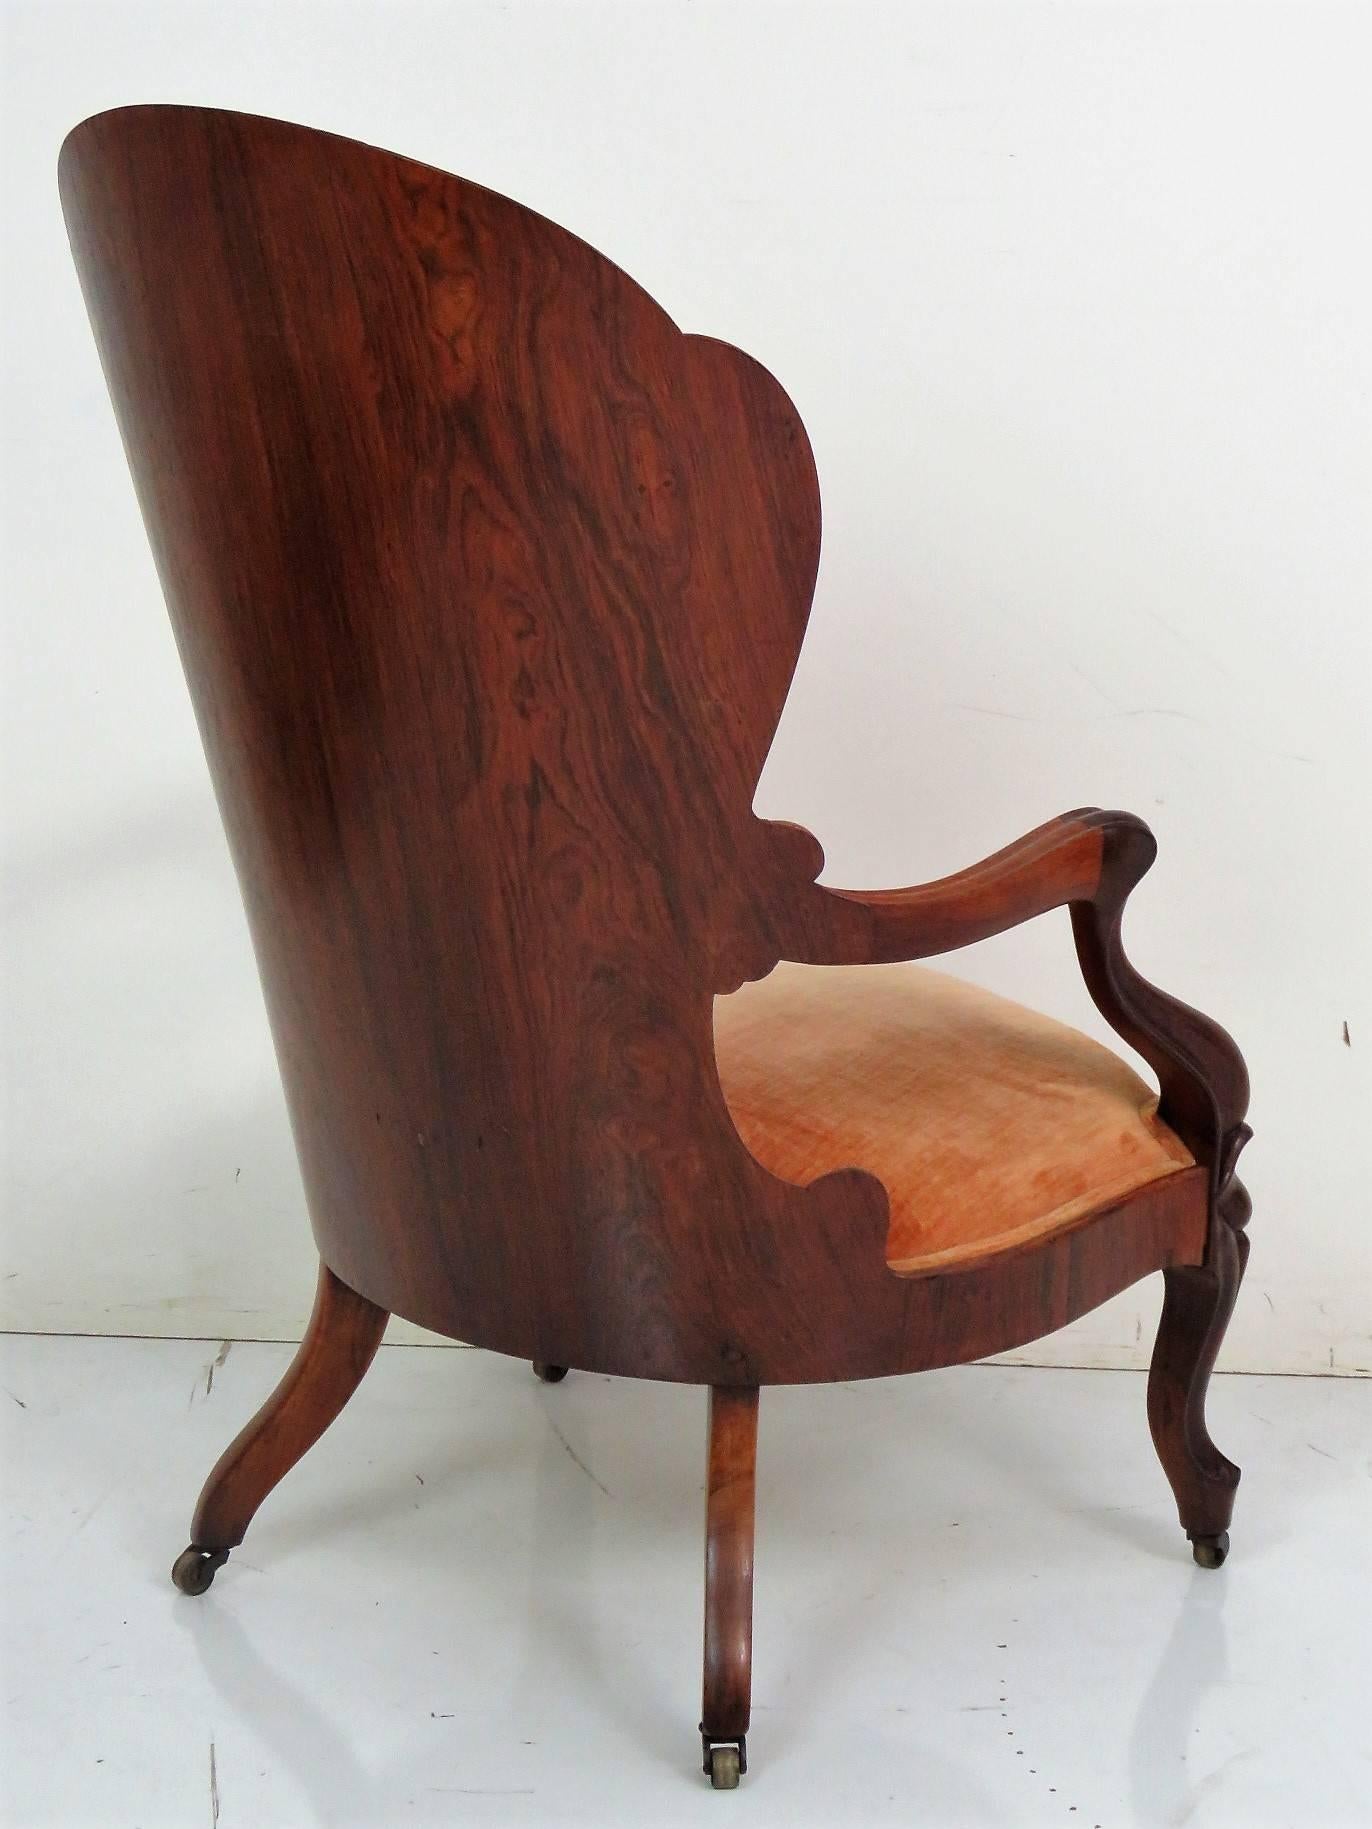 20th Century John Henry Belter Style Walnut Laminated Upholstered Man's Chair